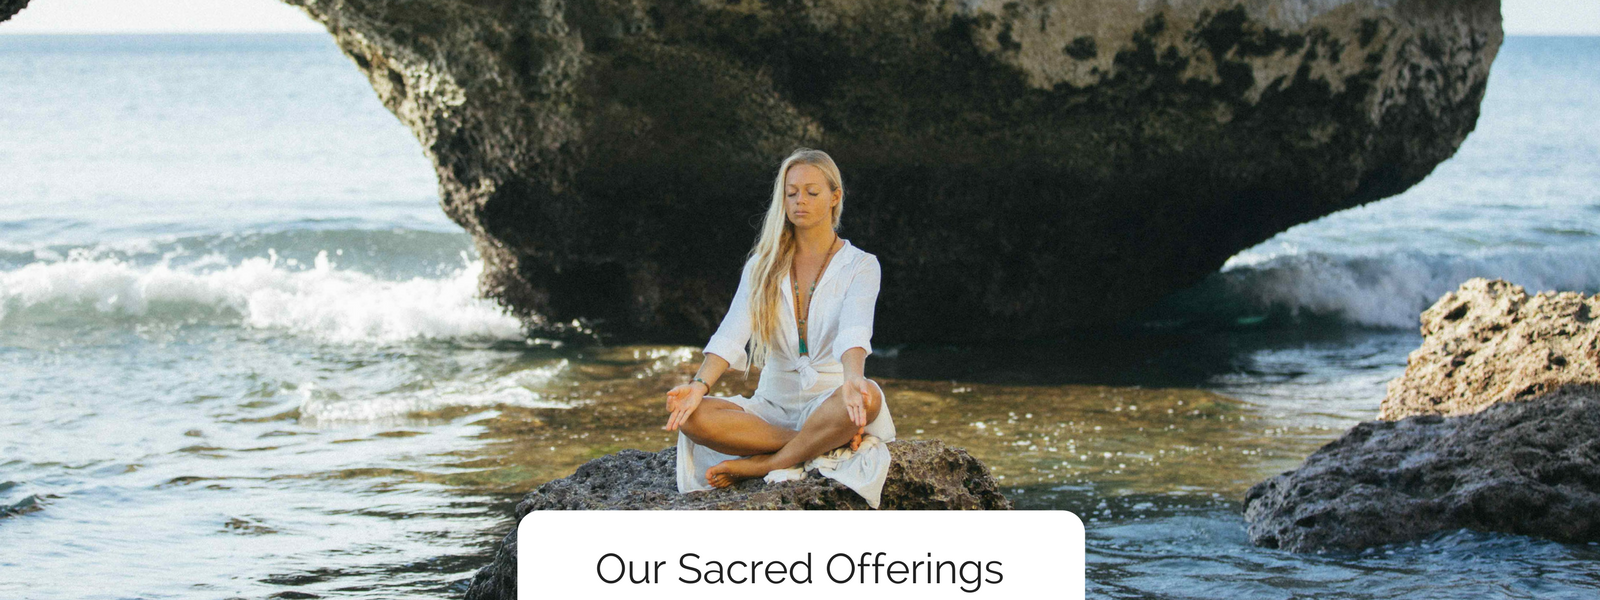 Our Sacred Offerings - Bali Malas